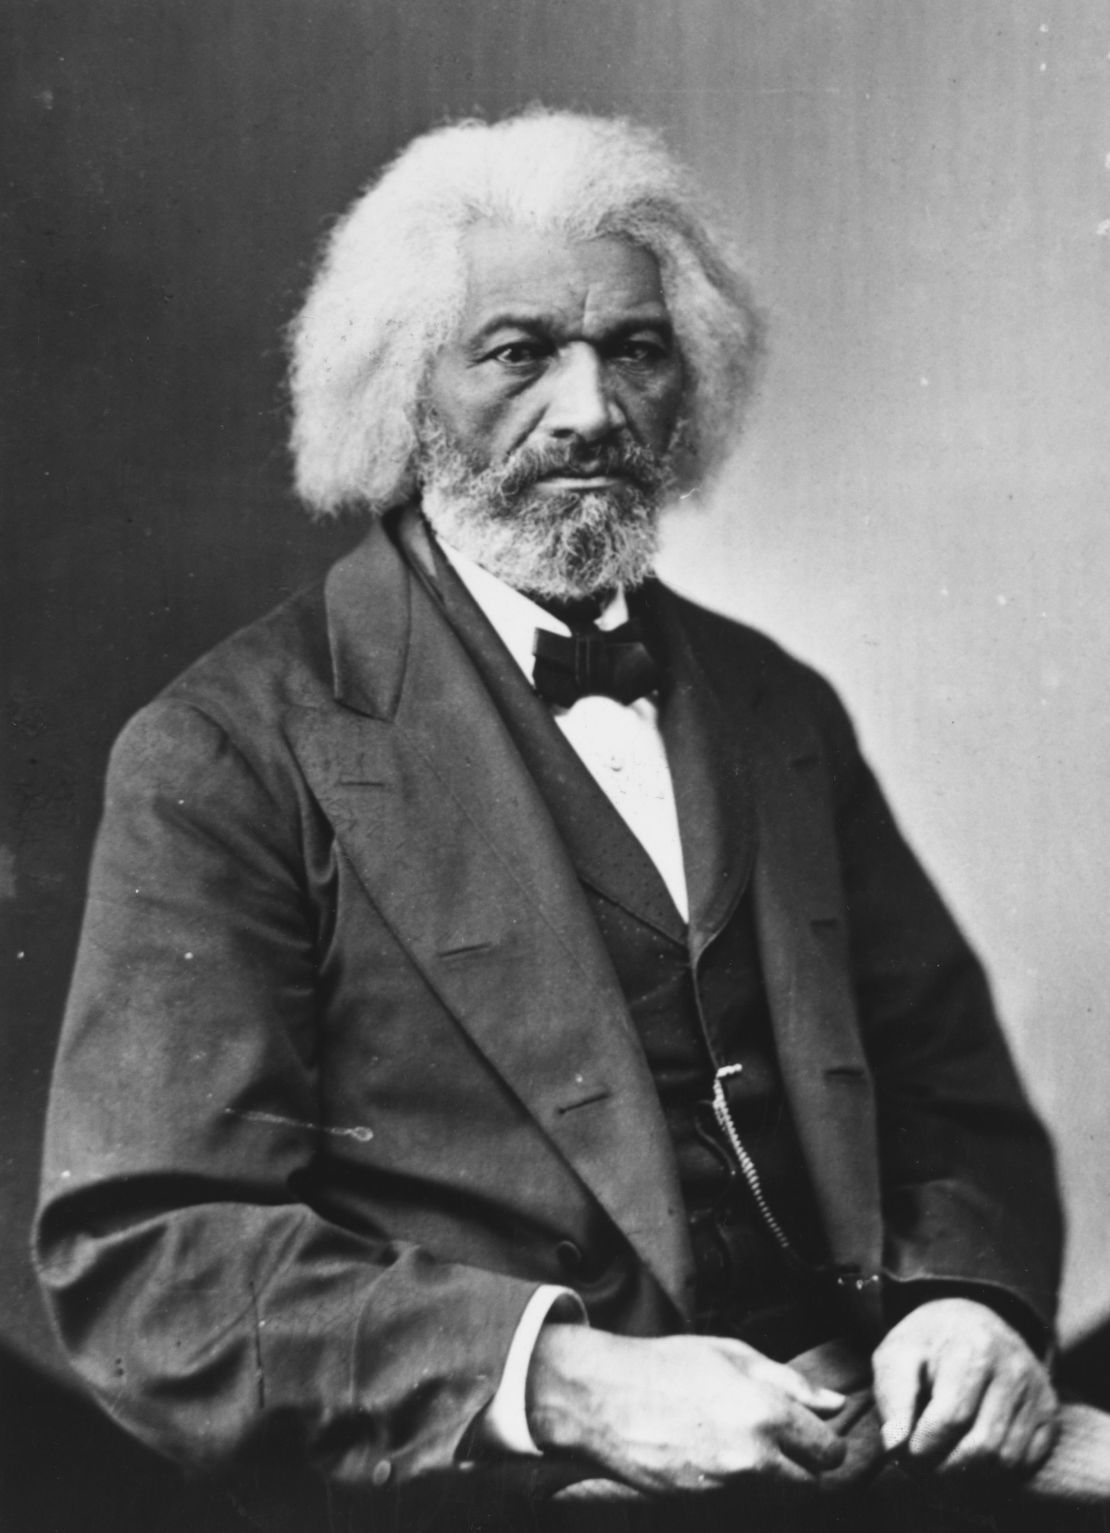 Author and abolitionist Frederick Douglass  became a strong supporter of the Republican Party in the late 19th century.